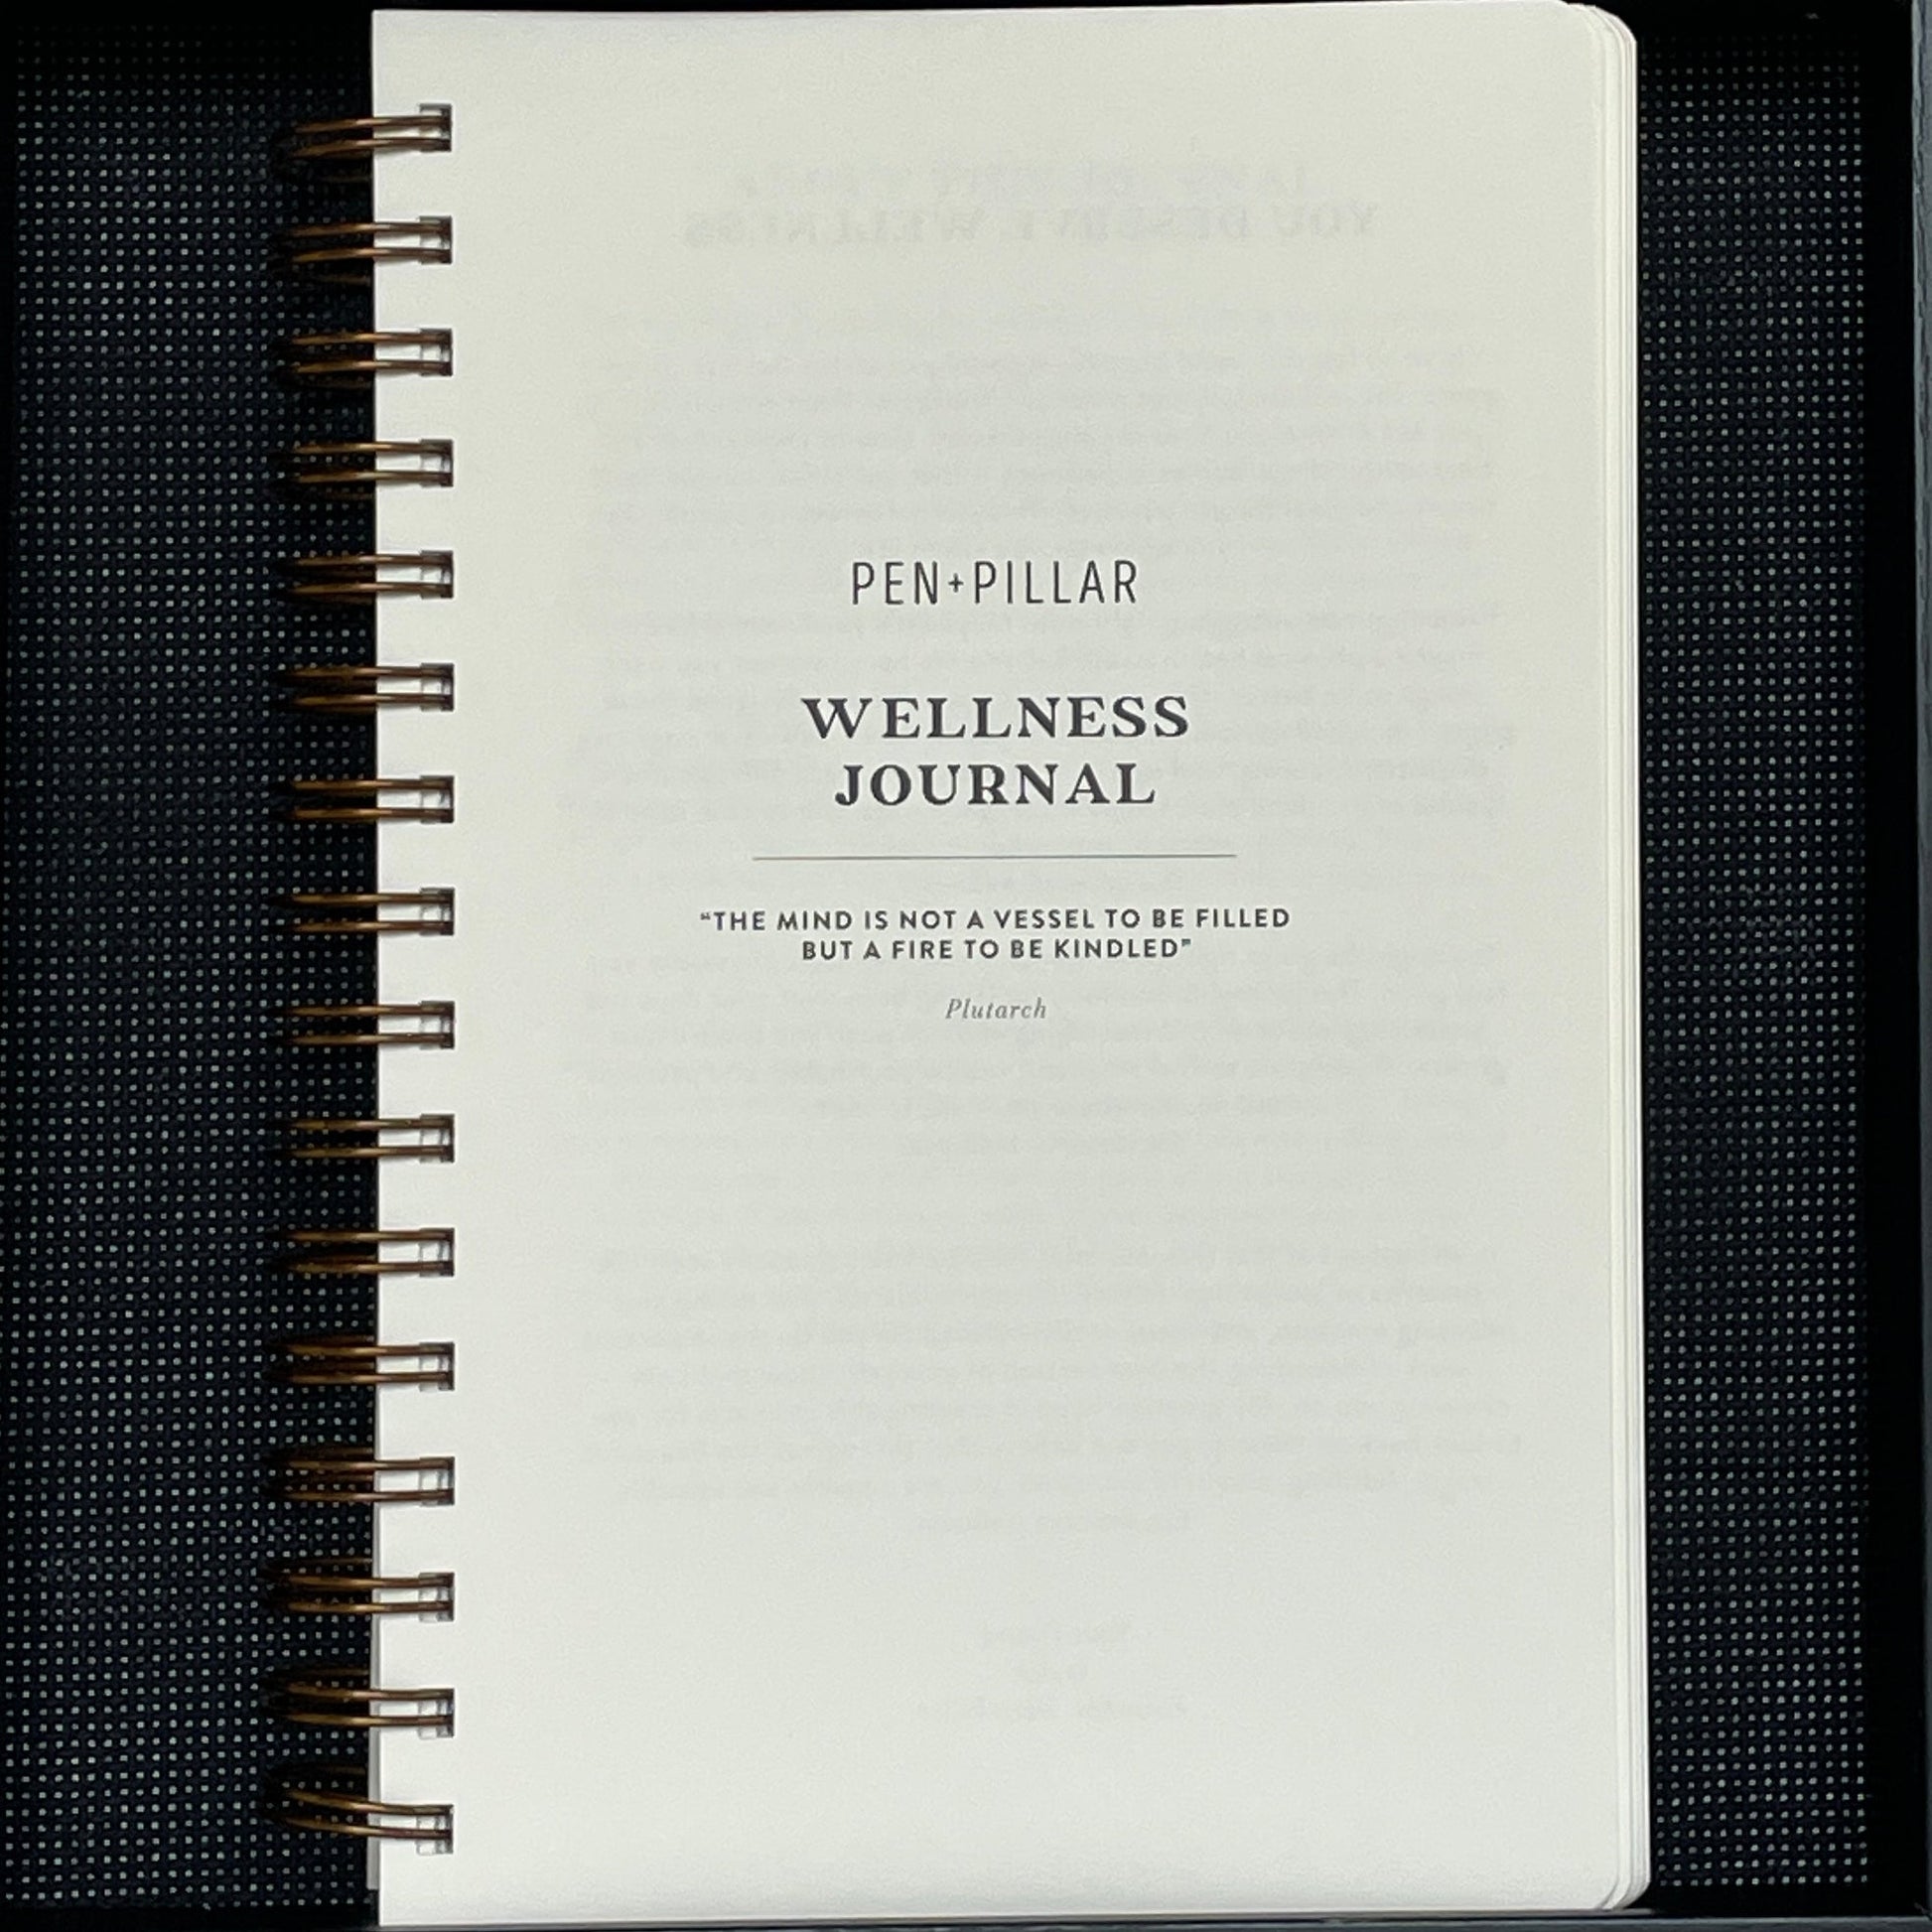 Wellness Journal open to the cover page